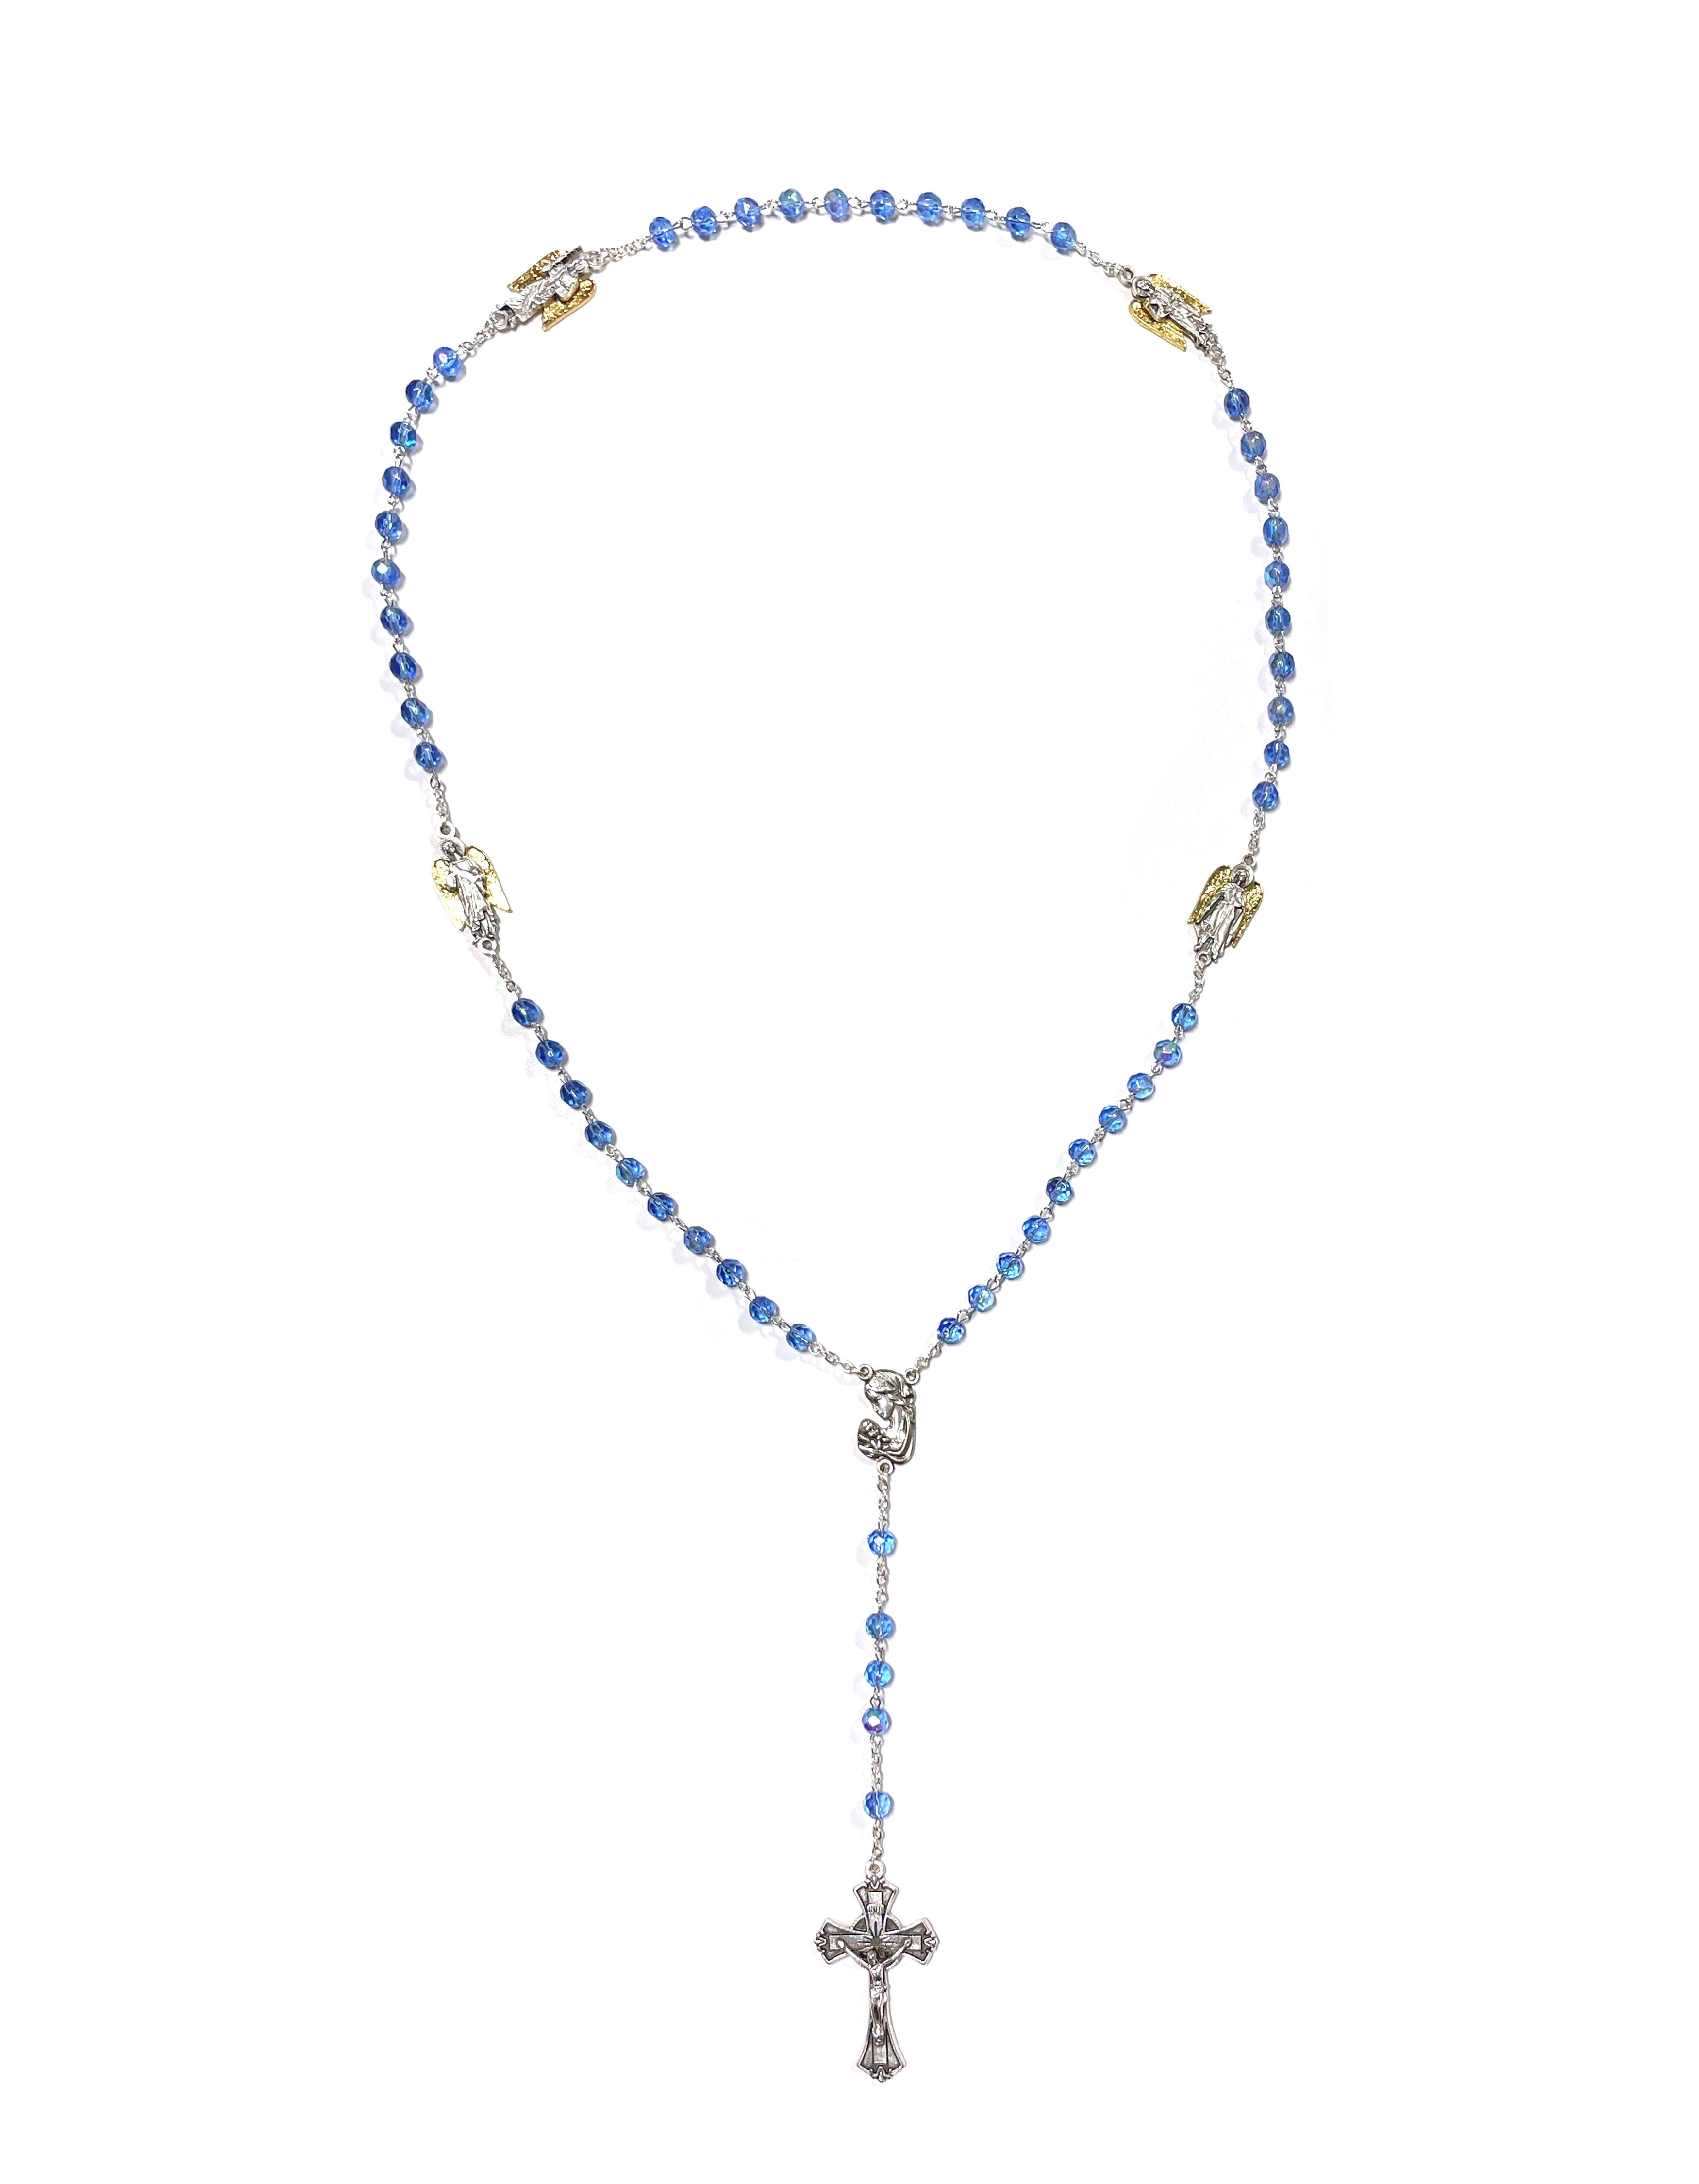 Blue crystal rosary with medals of the three Archangels and the Guardian Angel